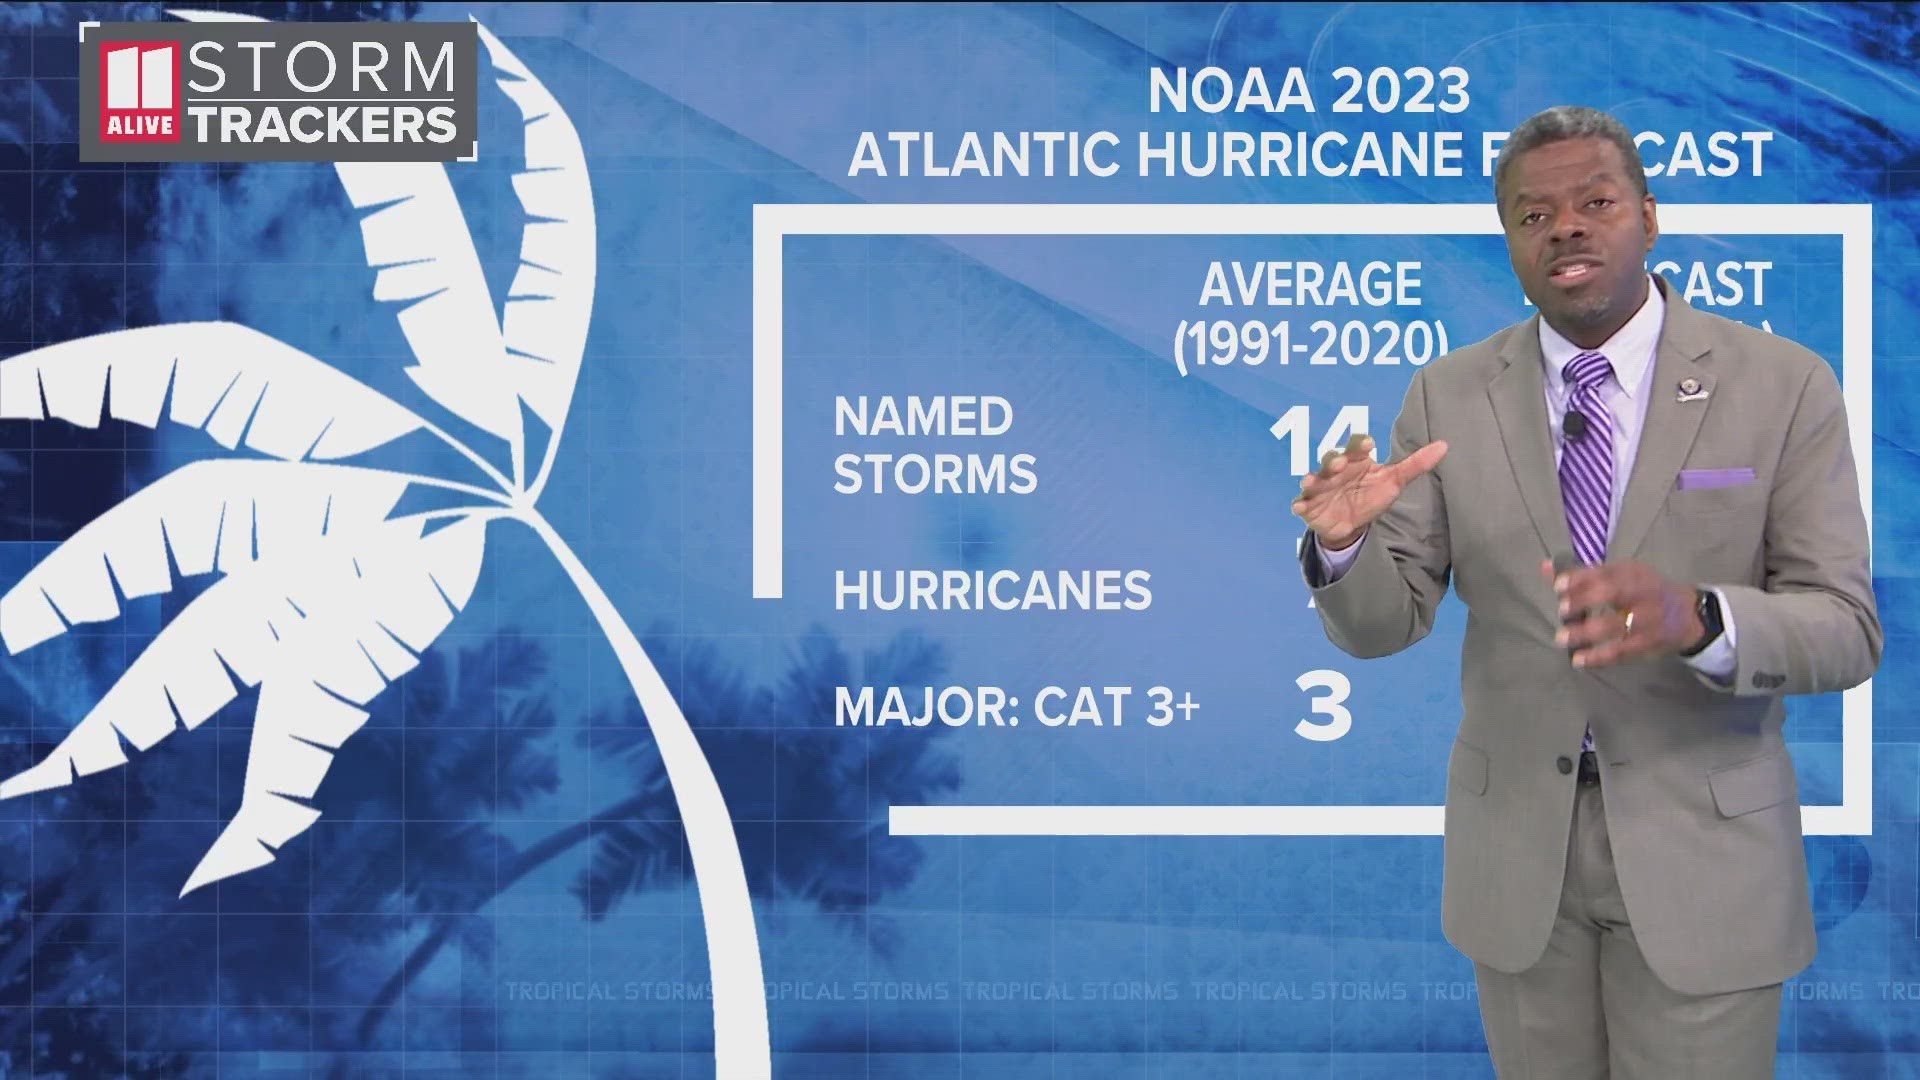 Here's a look at what to expect this hurricane season.